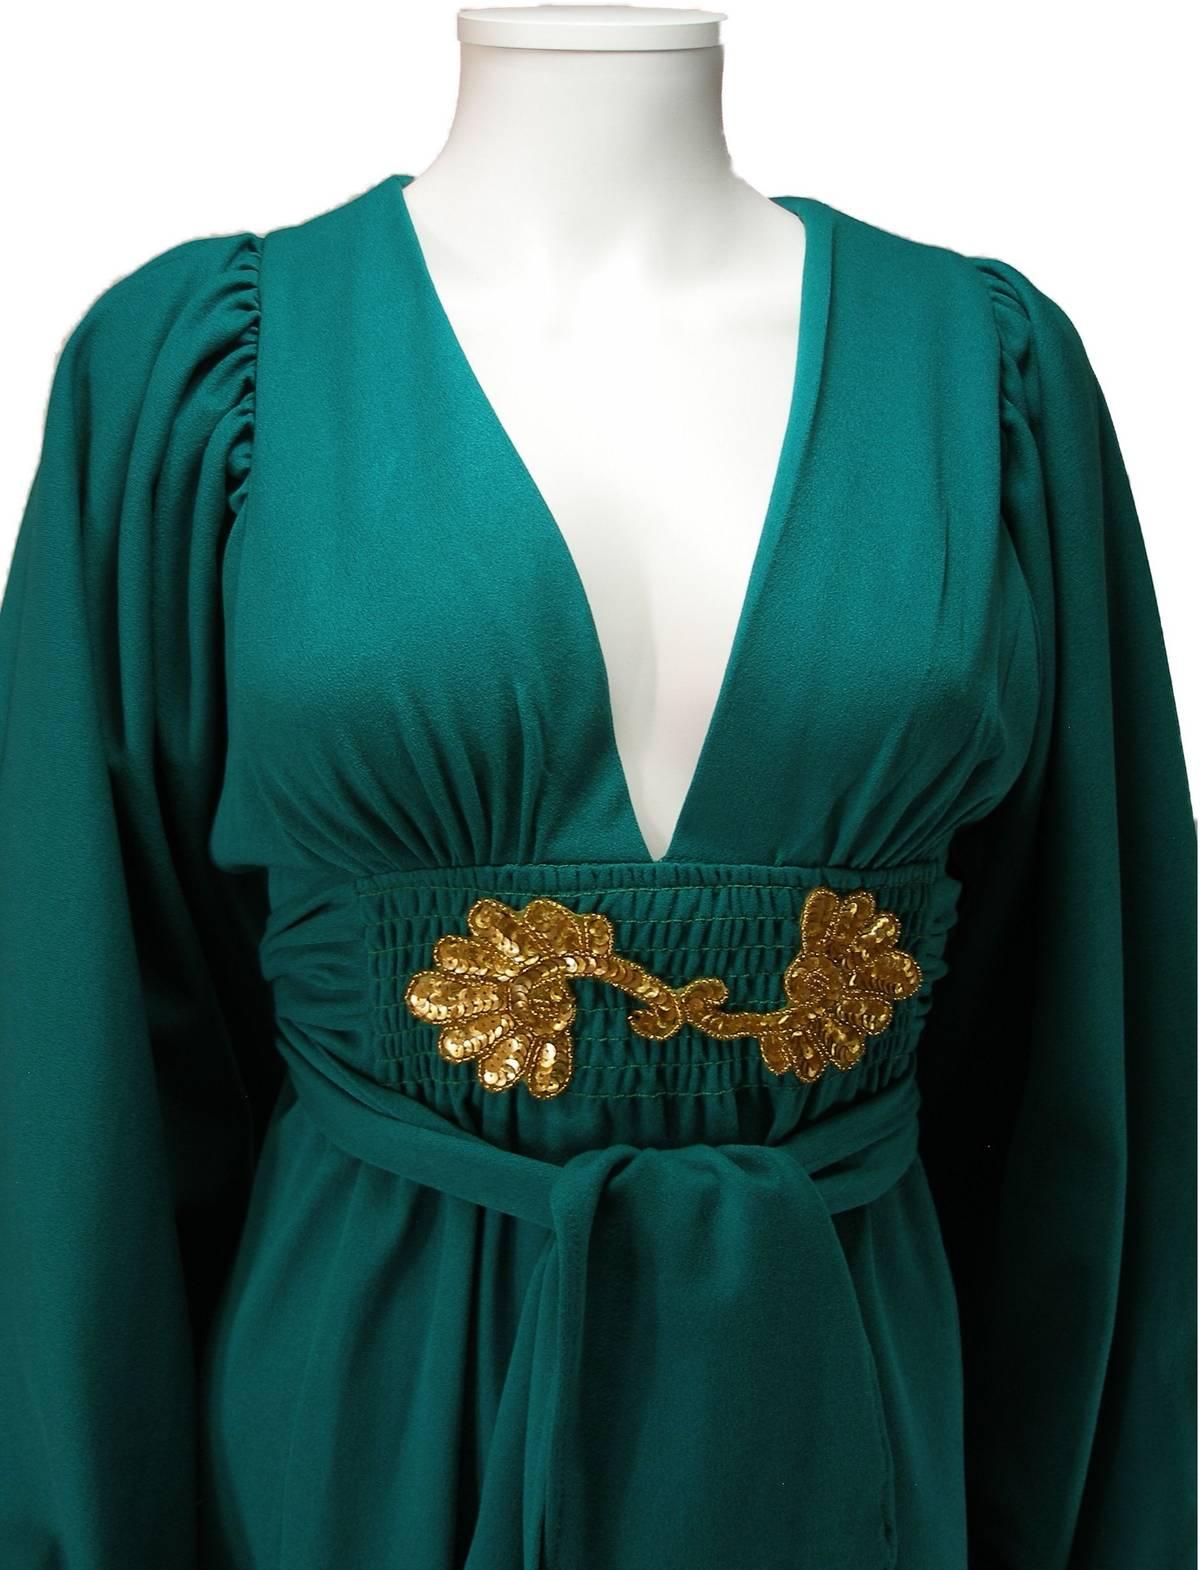 Rare Vintage Deep Green Ossie Clark for Radley early 1970's Maxi Dress US 4 Size For Sale 11